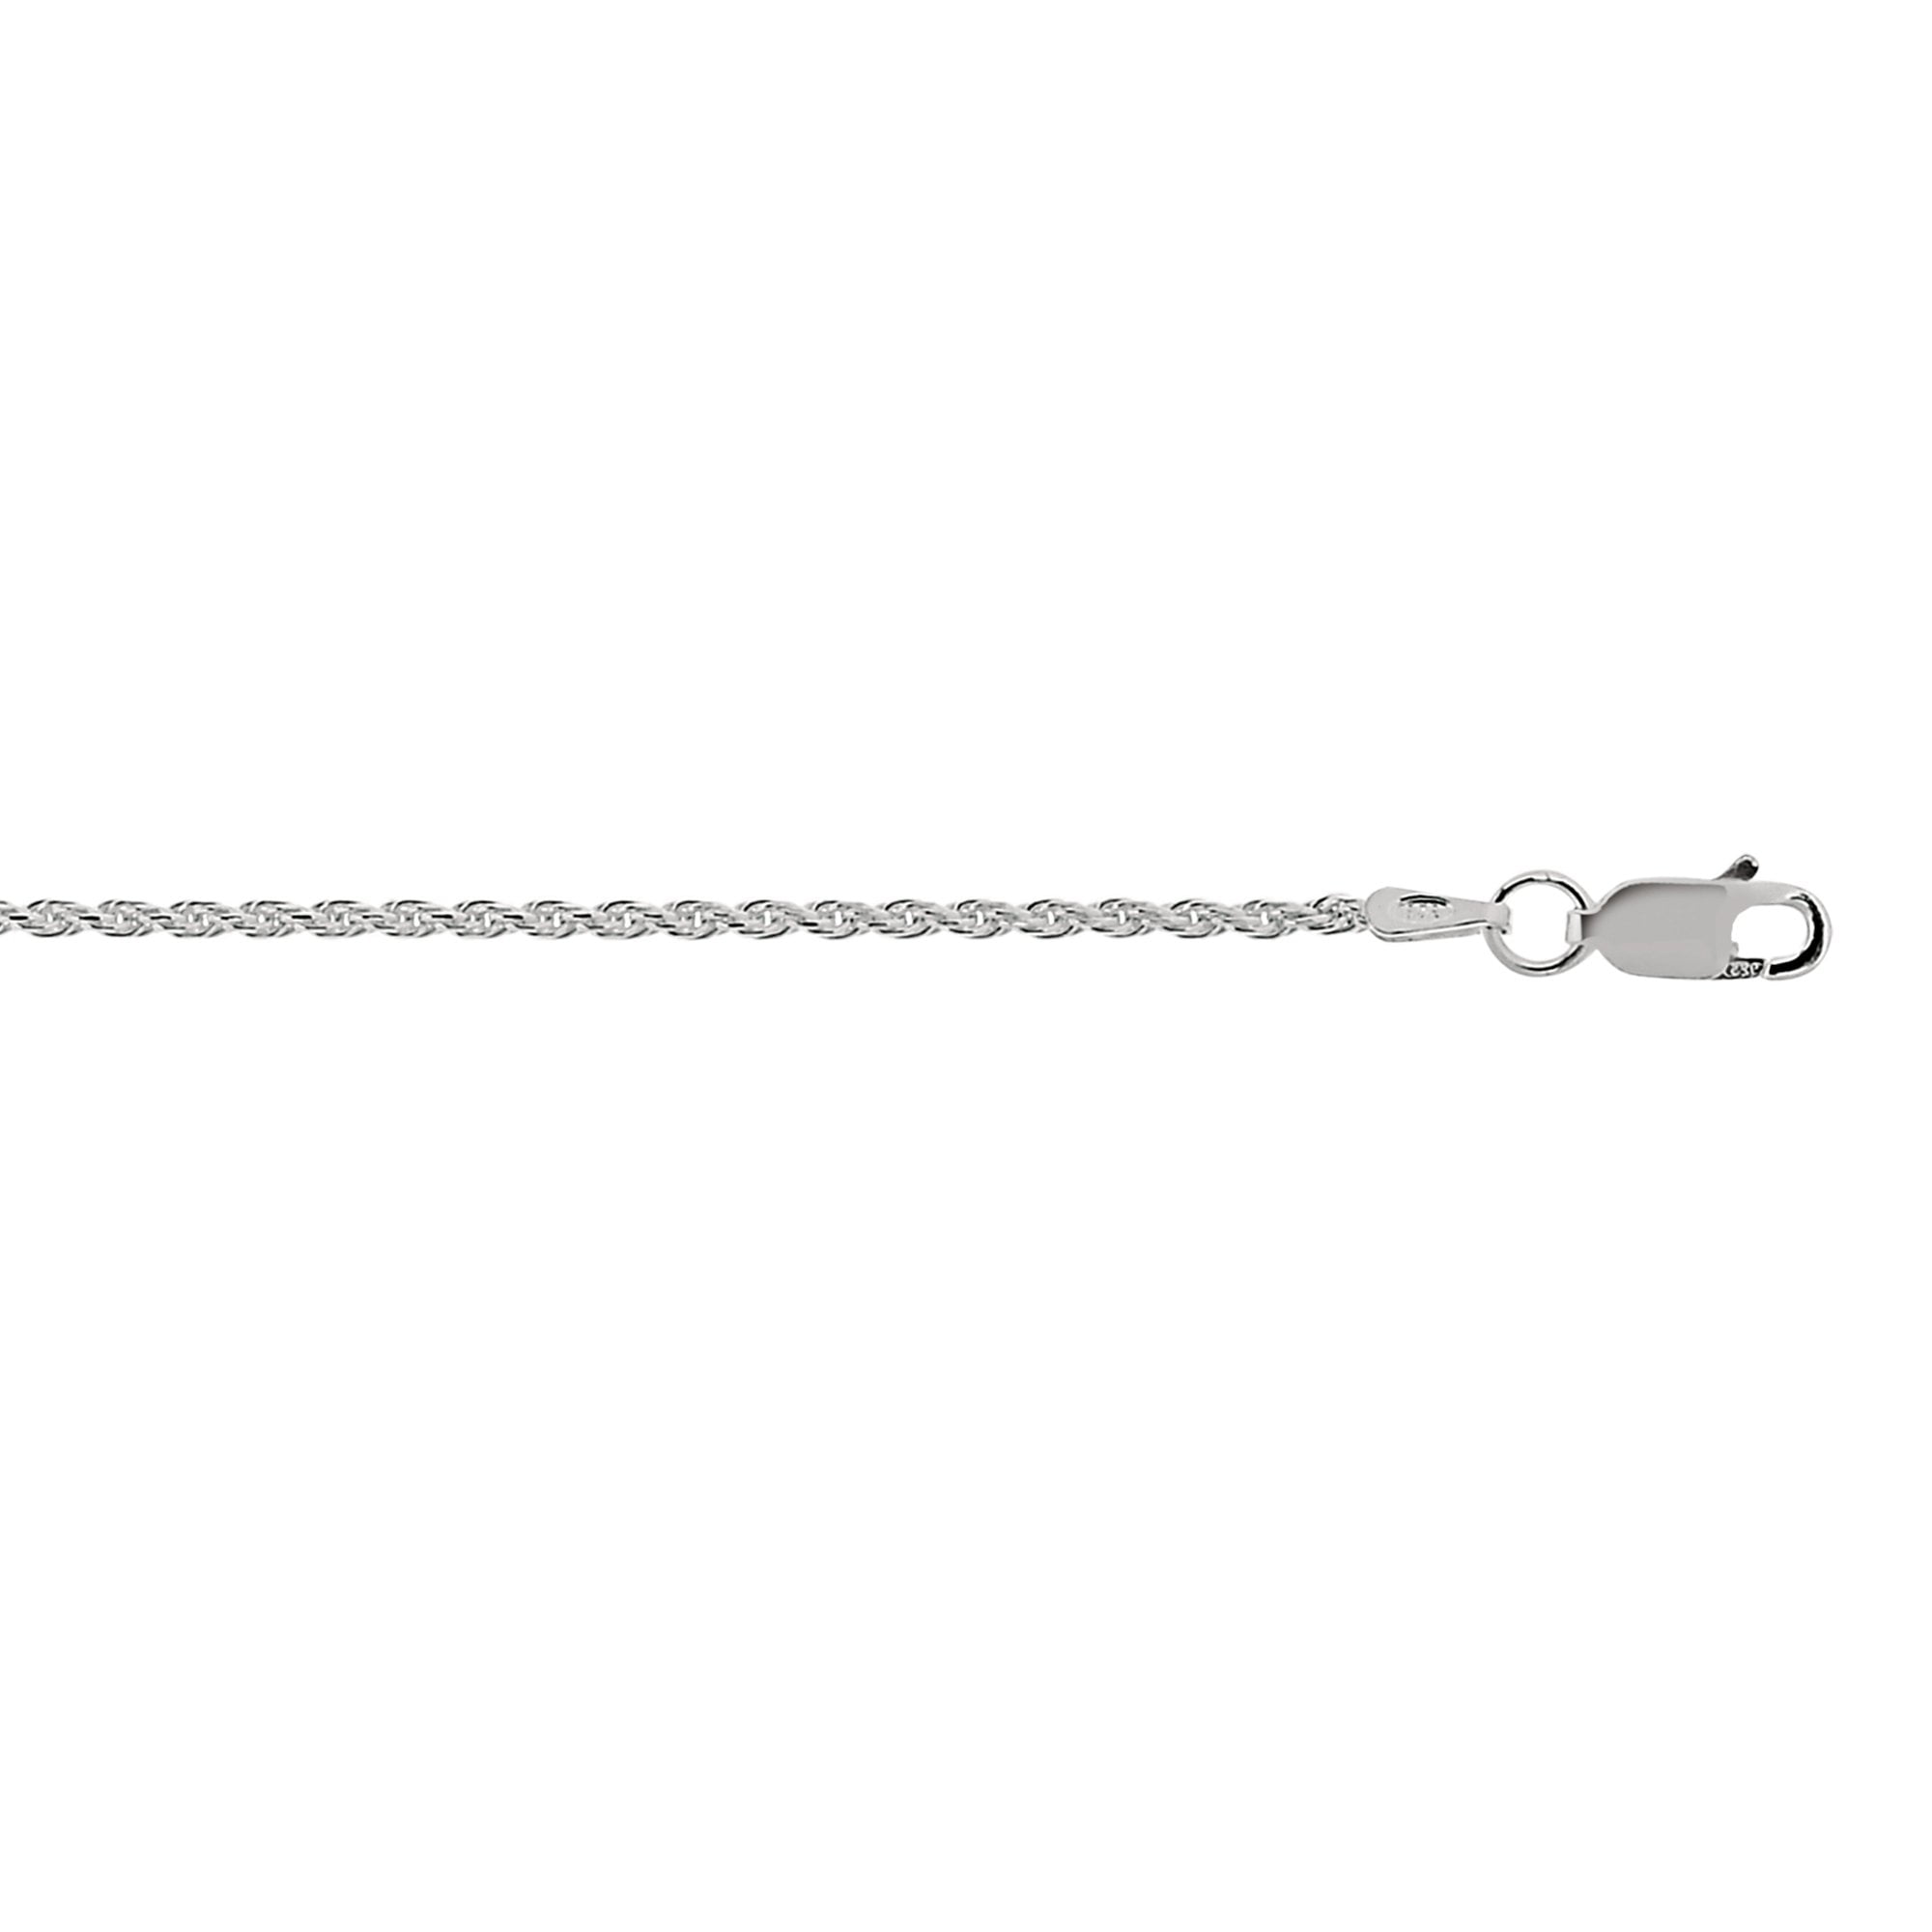 Sterling .925 Silver with Rhodium Finish 1.1mm Diamond Cut Snake Chain Necklace Lobster Clasp by IcedTime